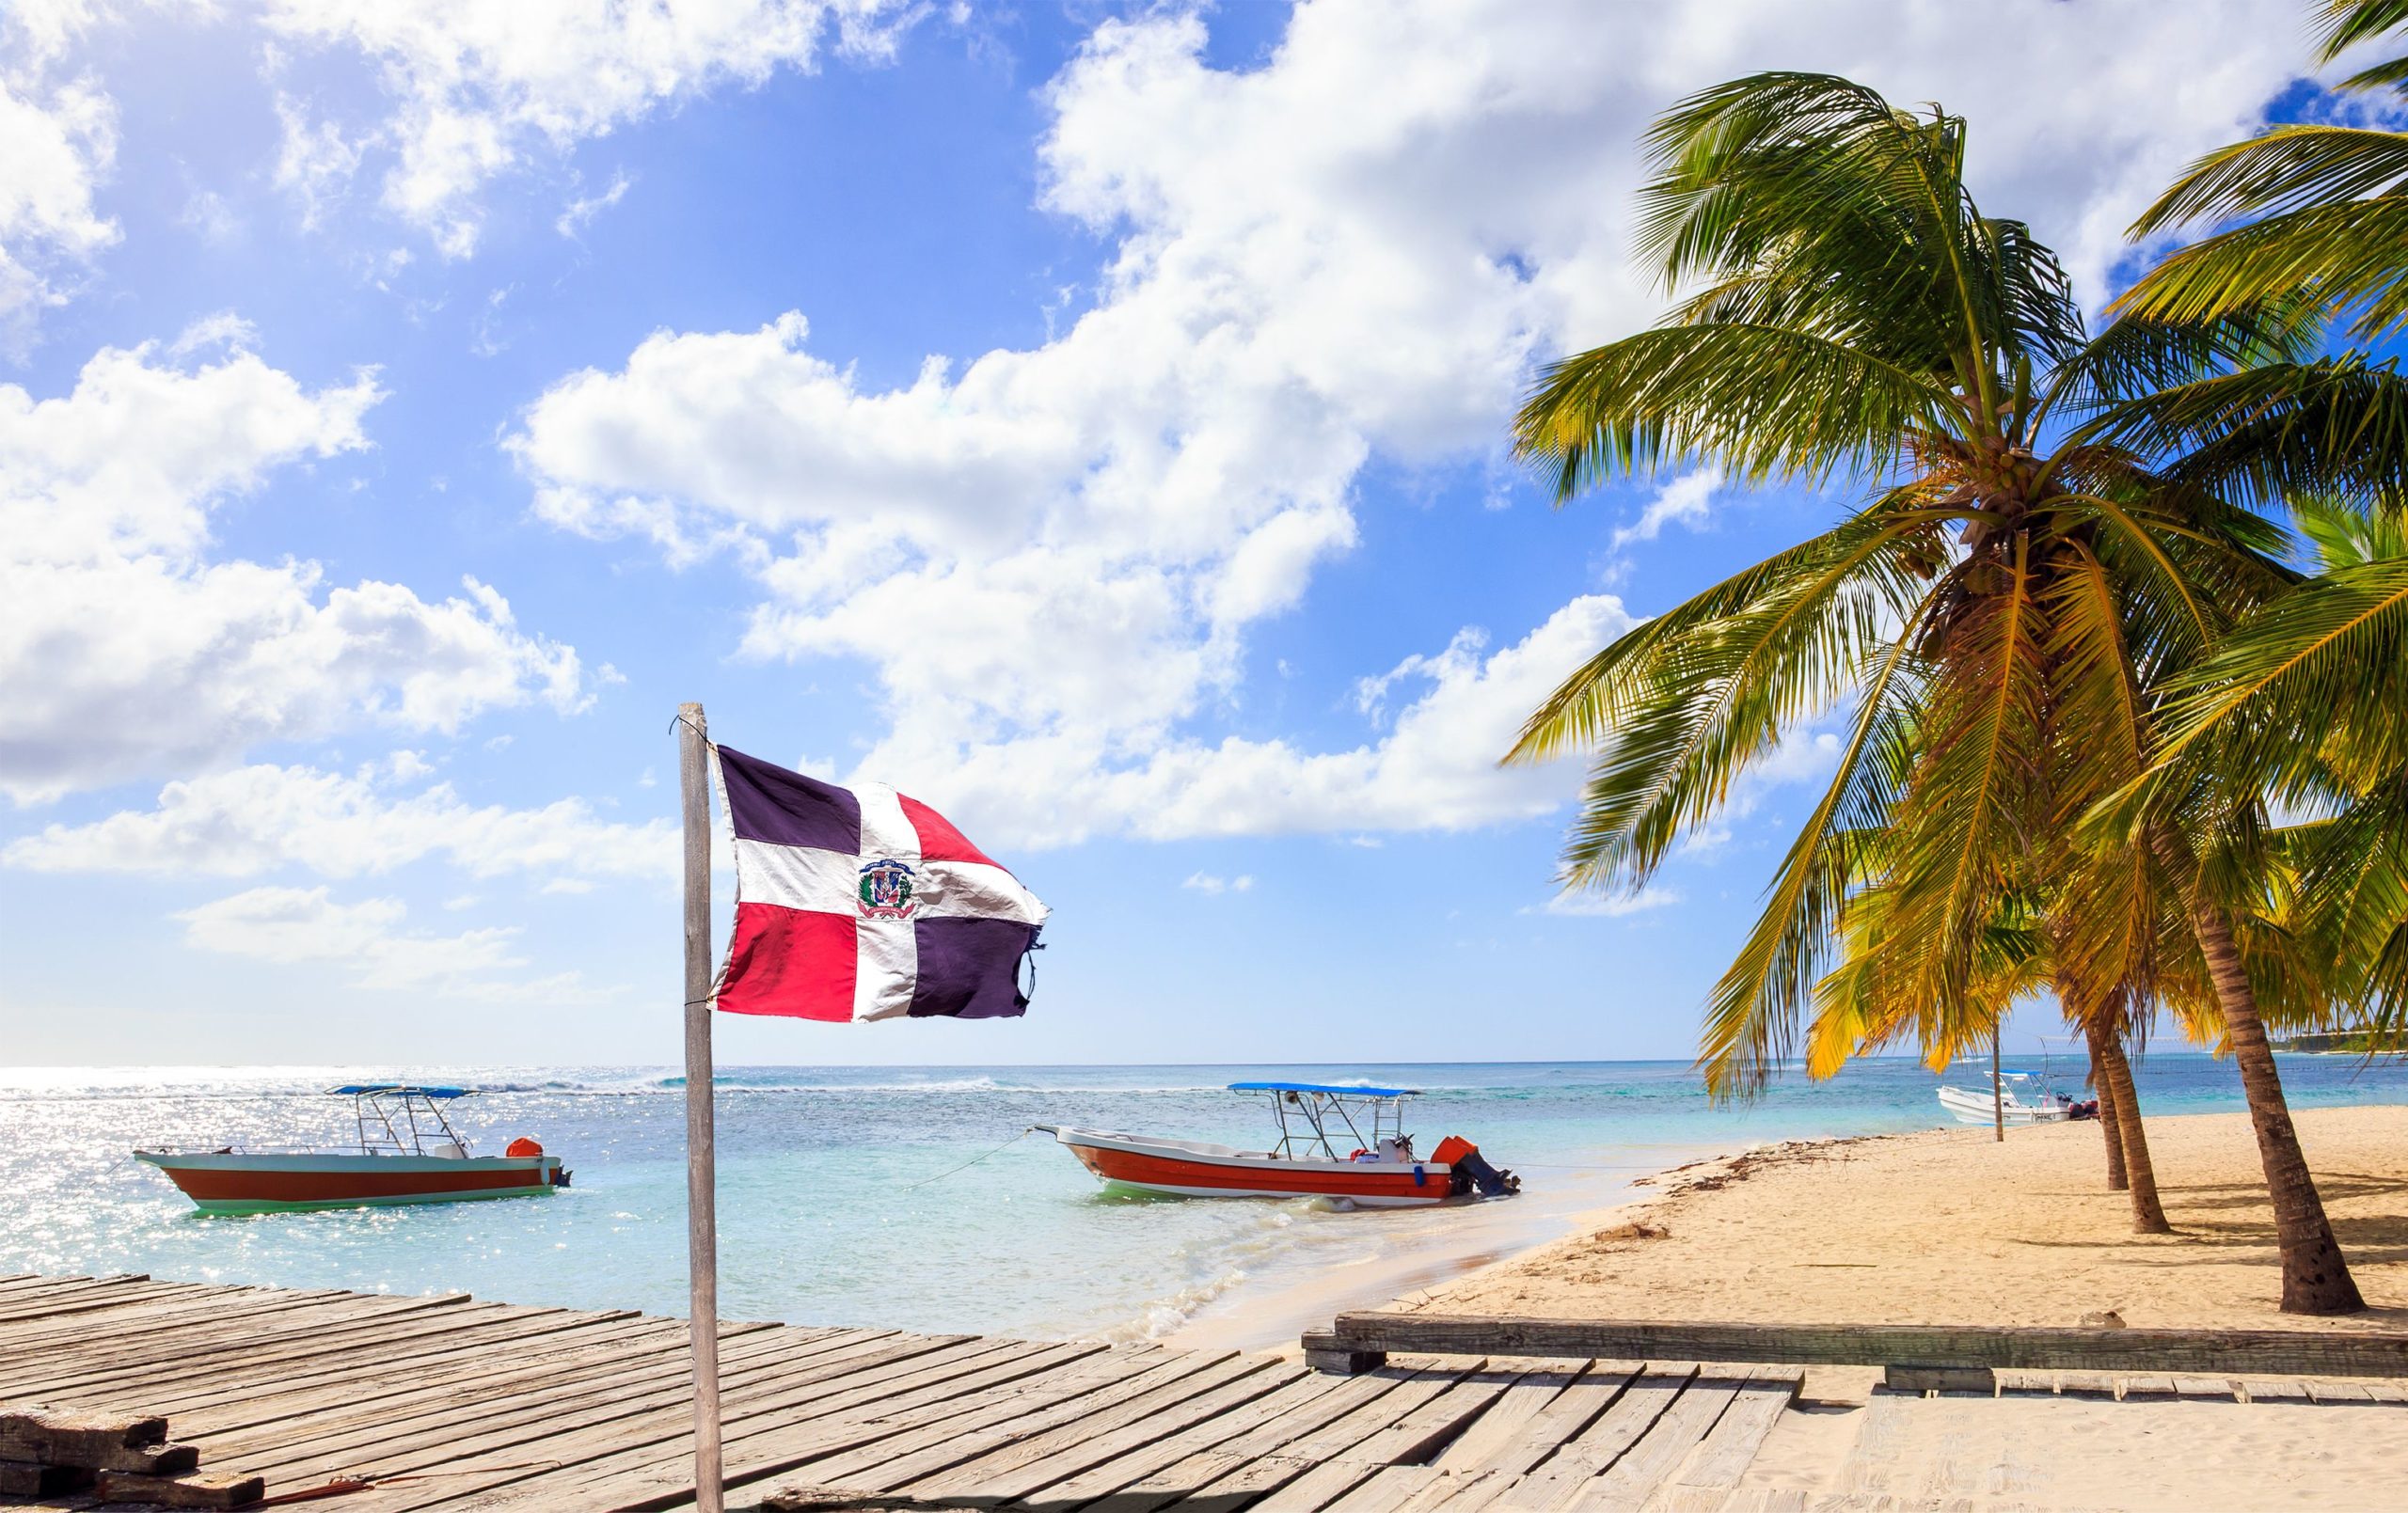 Dominican Republic receives a record number of more than 620,000 tourists in August